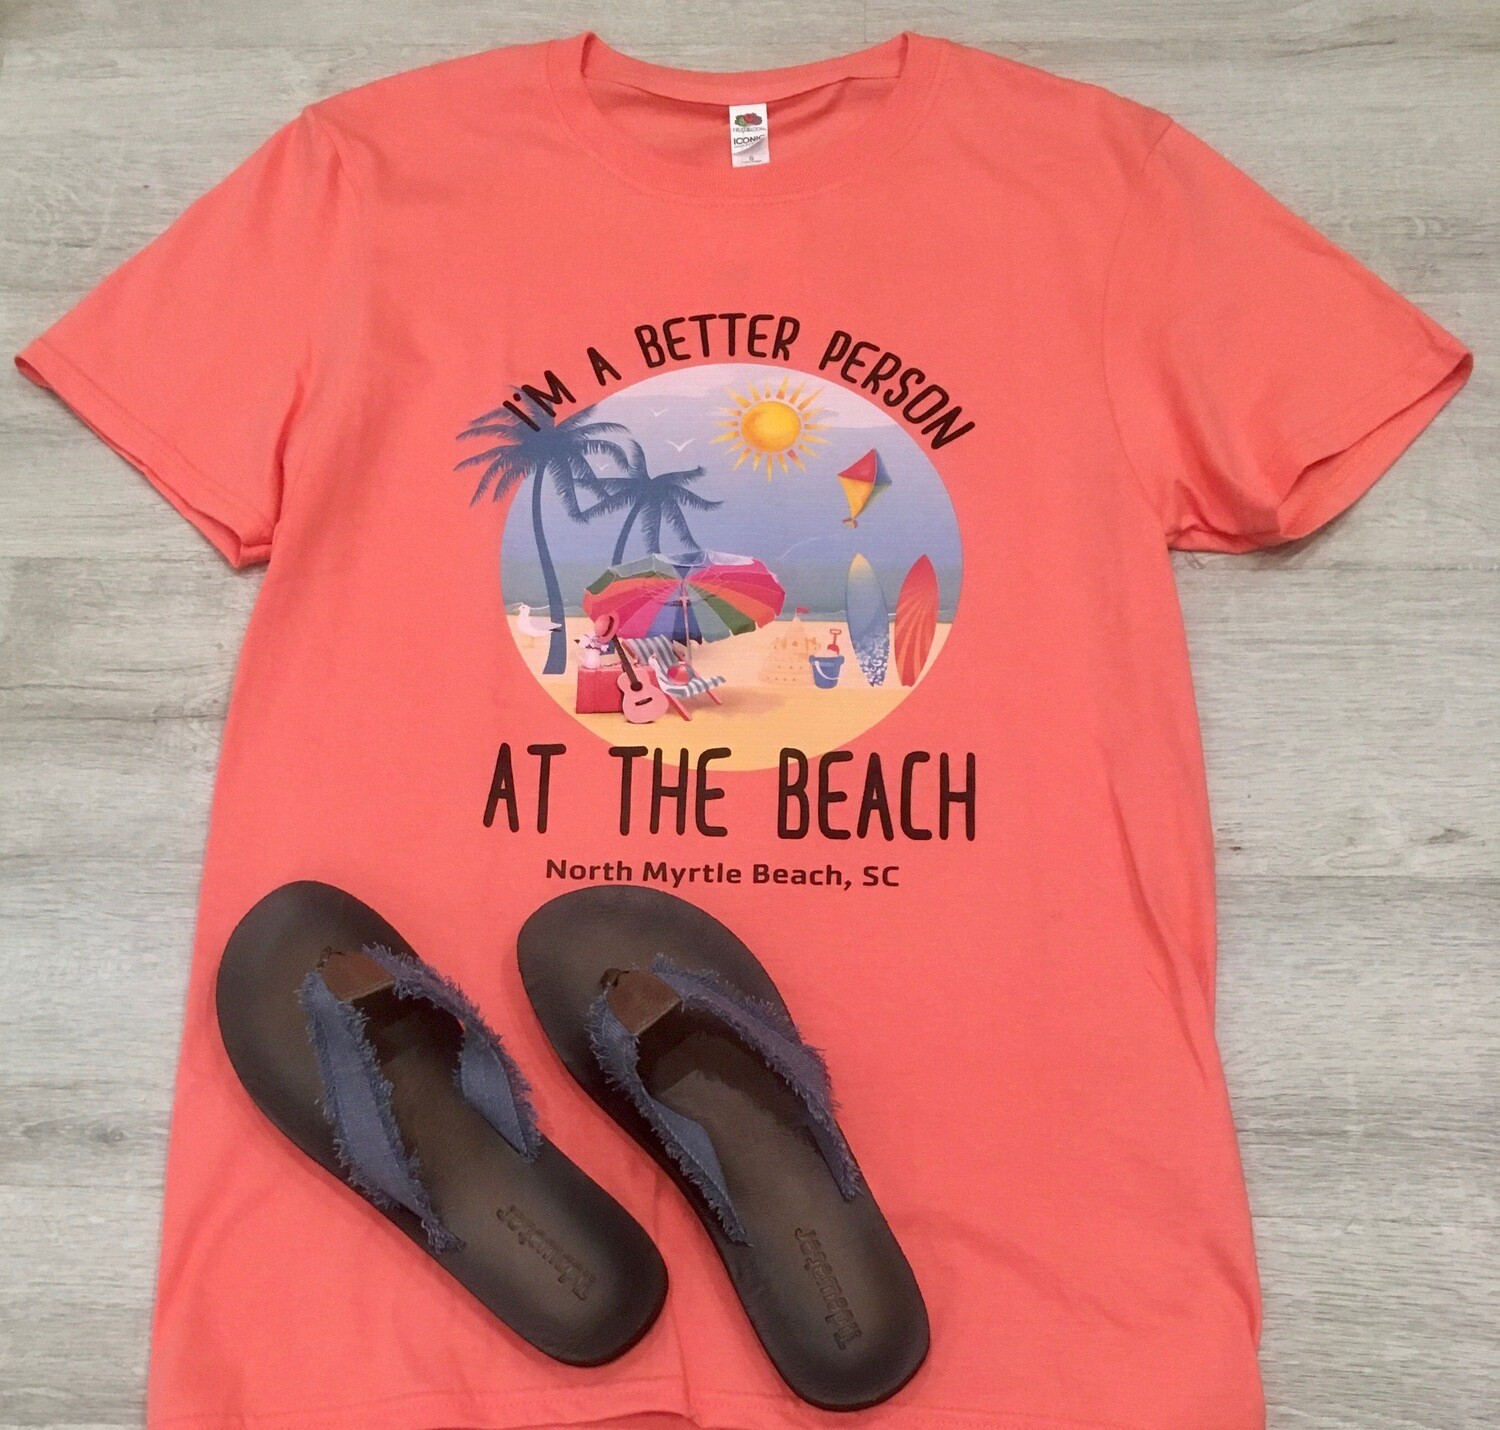 I Am A Better Person At the Beach tee